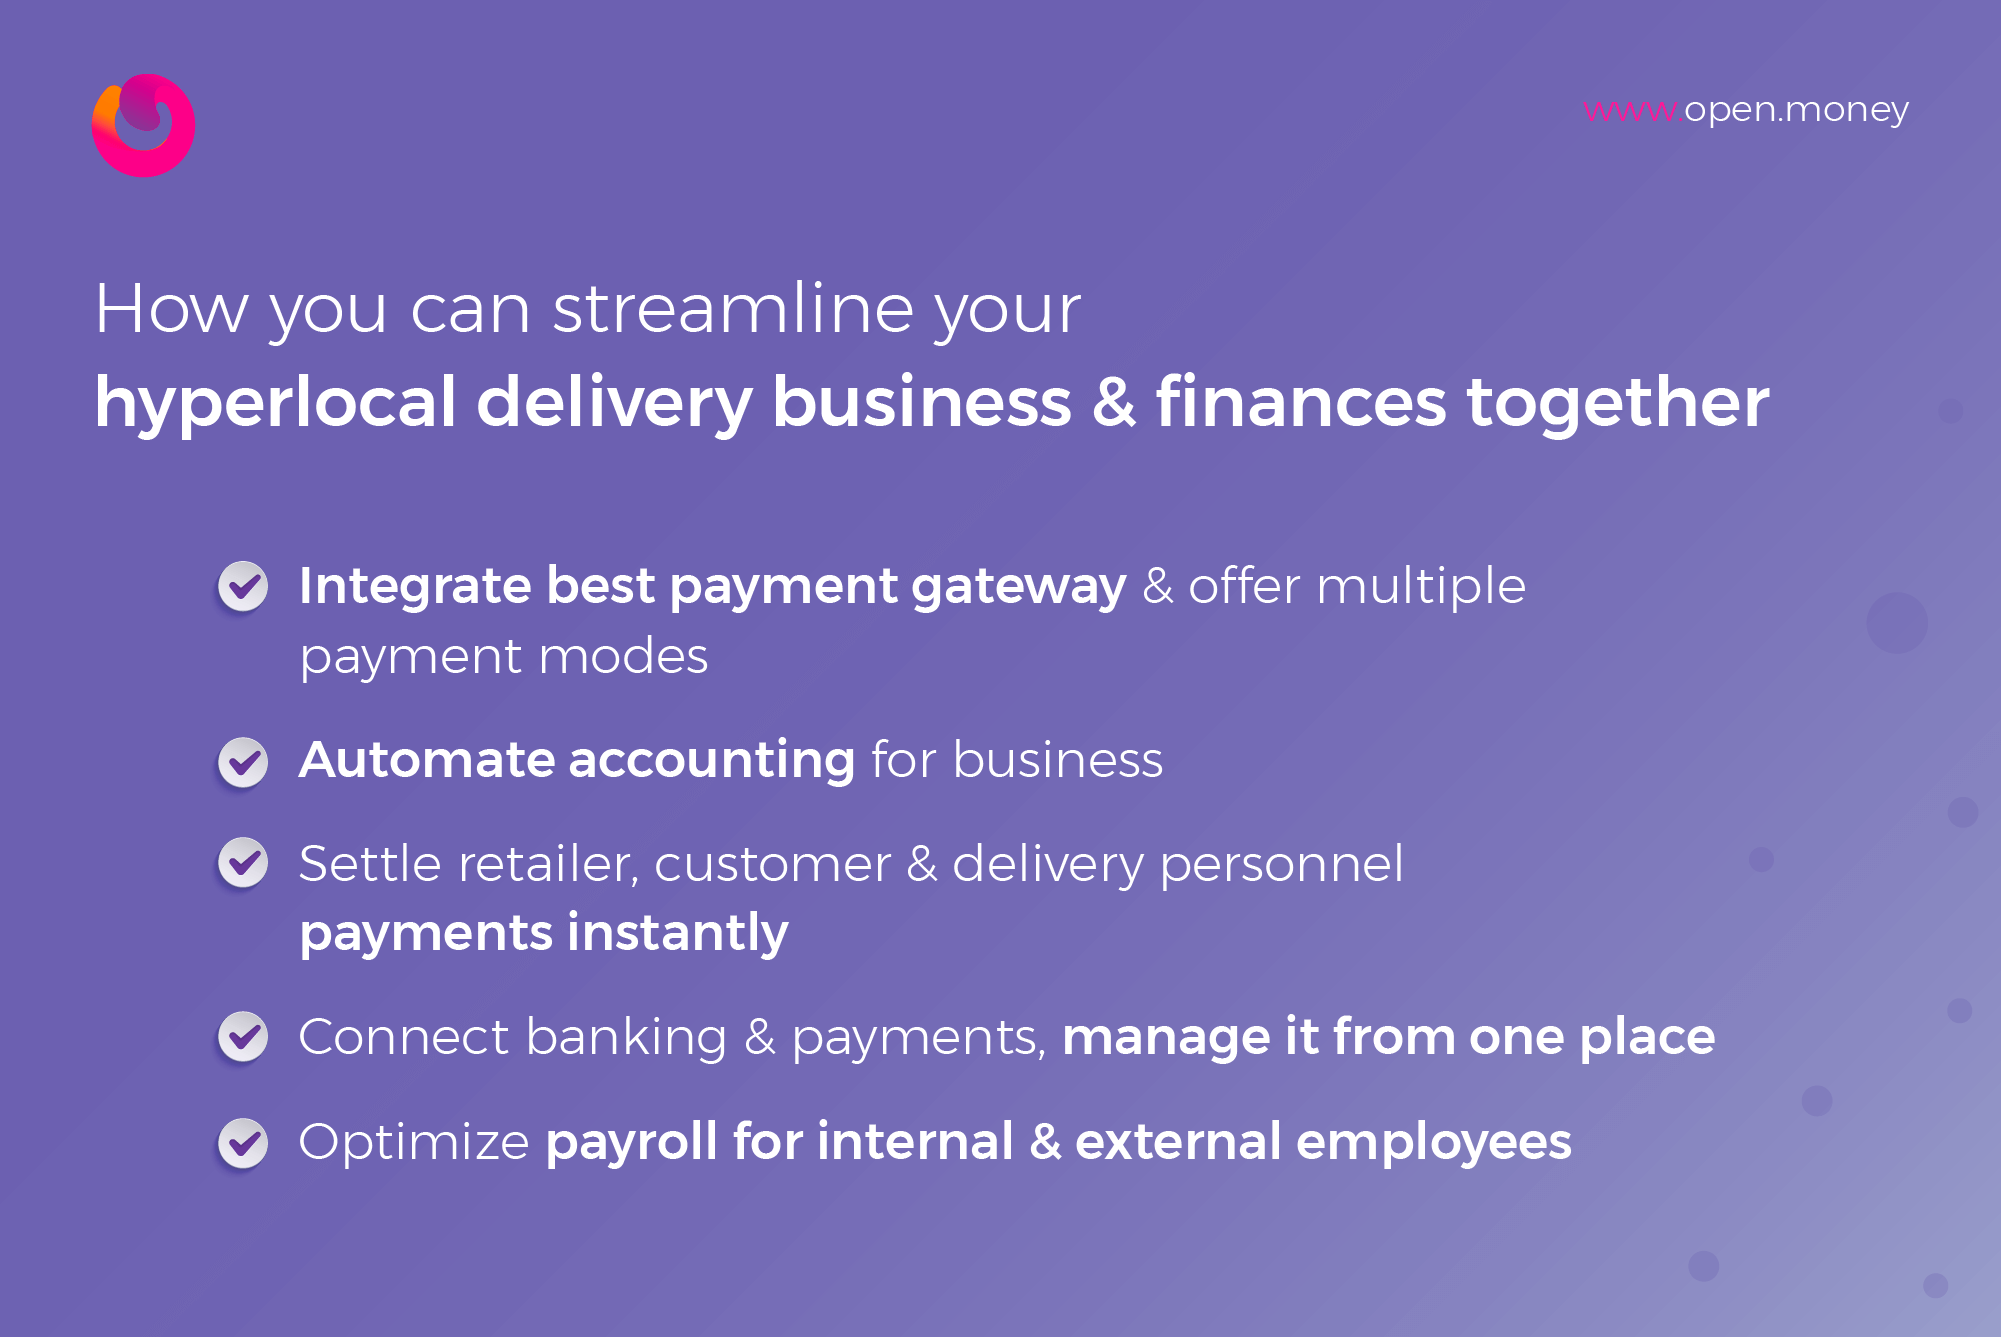 Hyperlocal businesses can manage business & finances together 